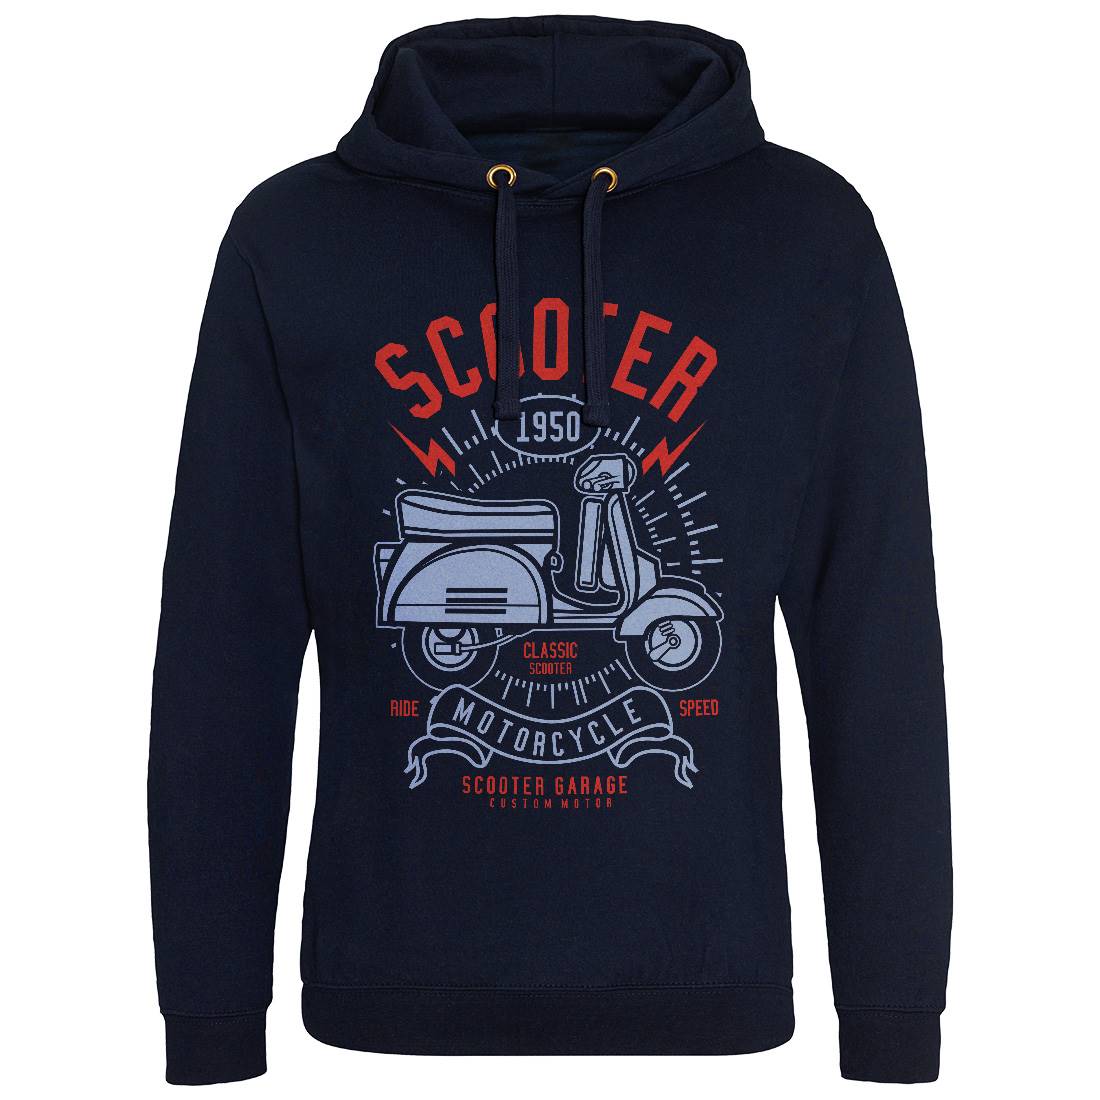 Scooter Mens Hoodie Without Pocket Motorcycles A276